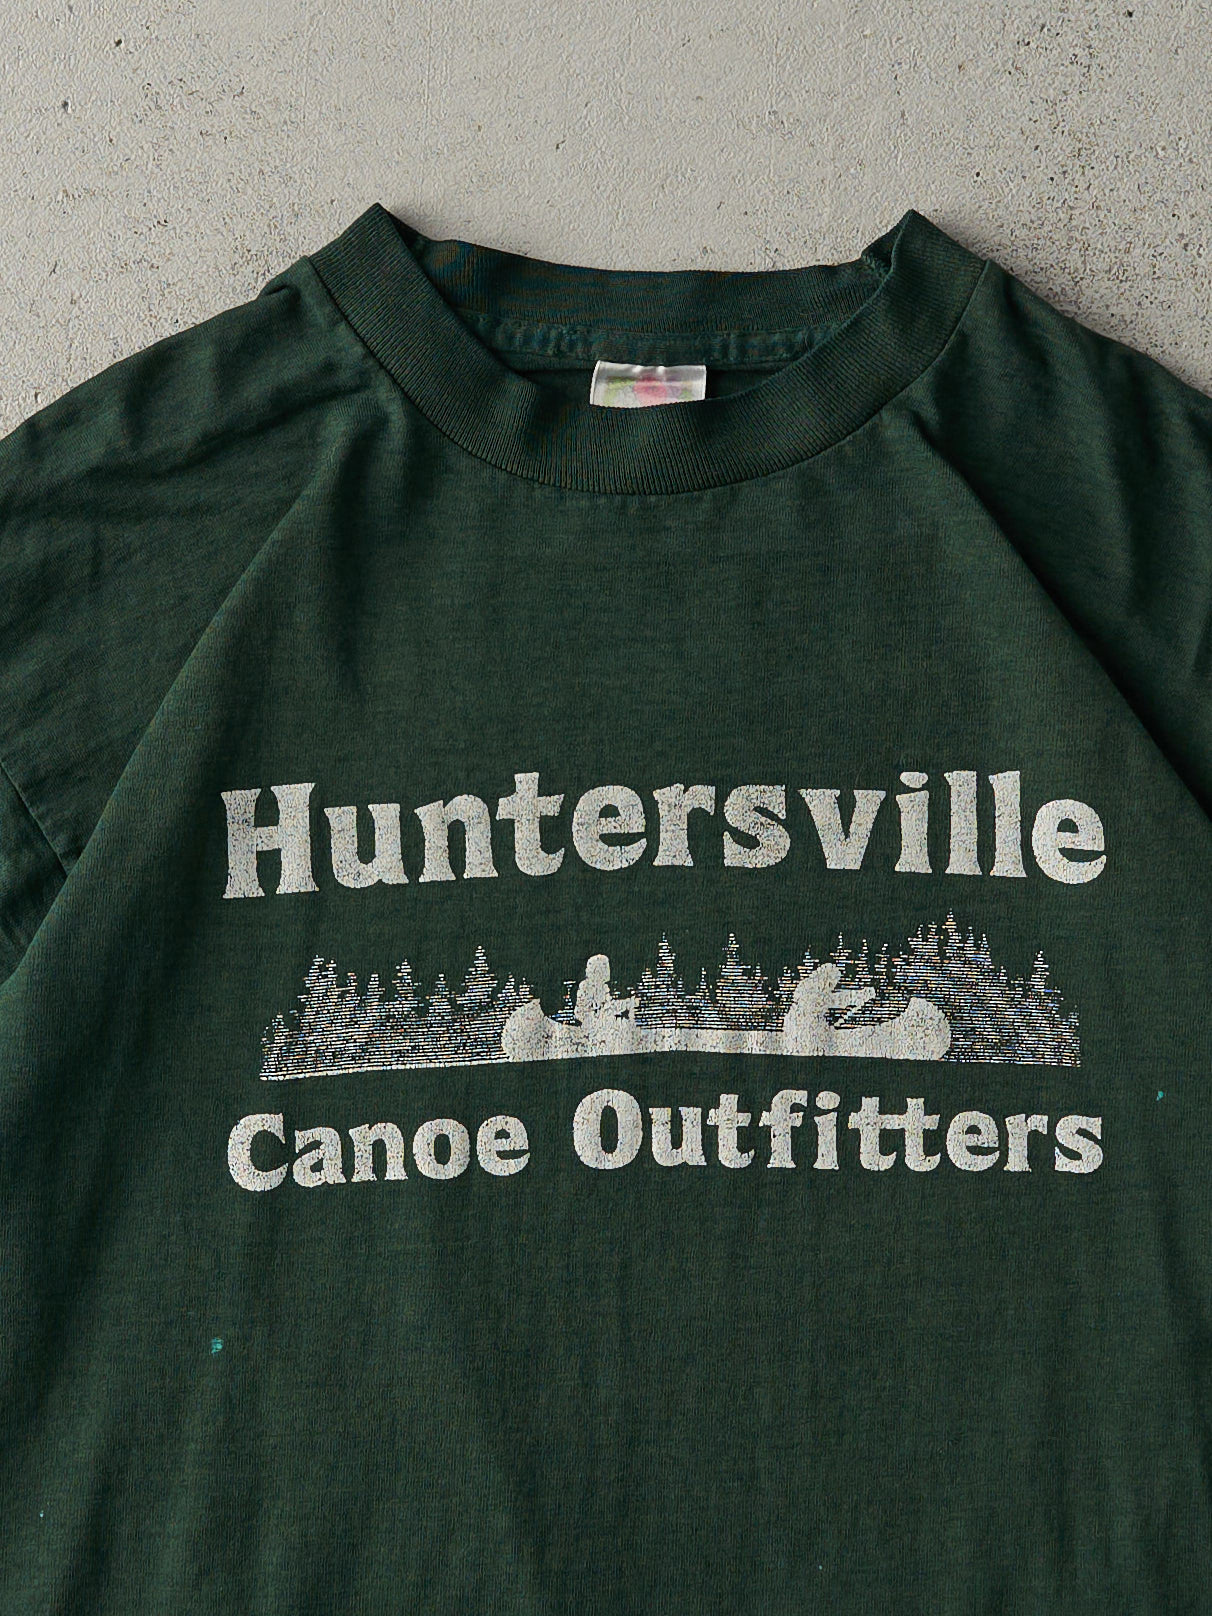 Vintage 90s Forest Green Huntersville Canoe Outfitters Single Stitch Tee (M)